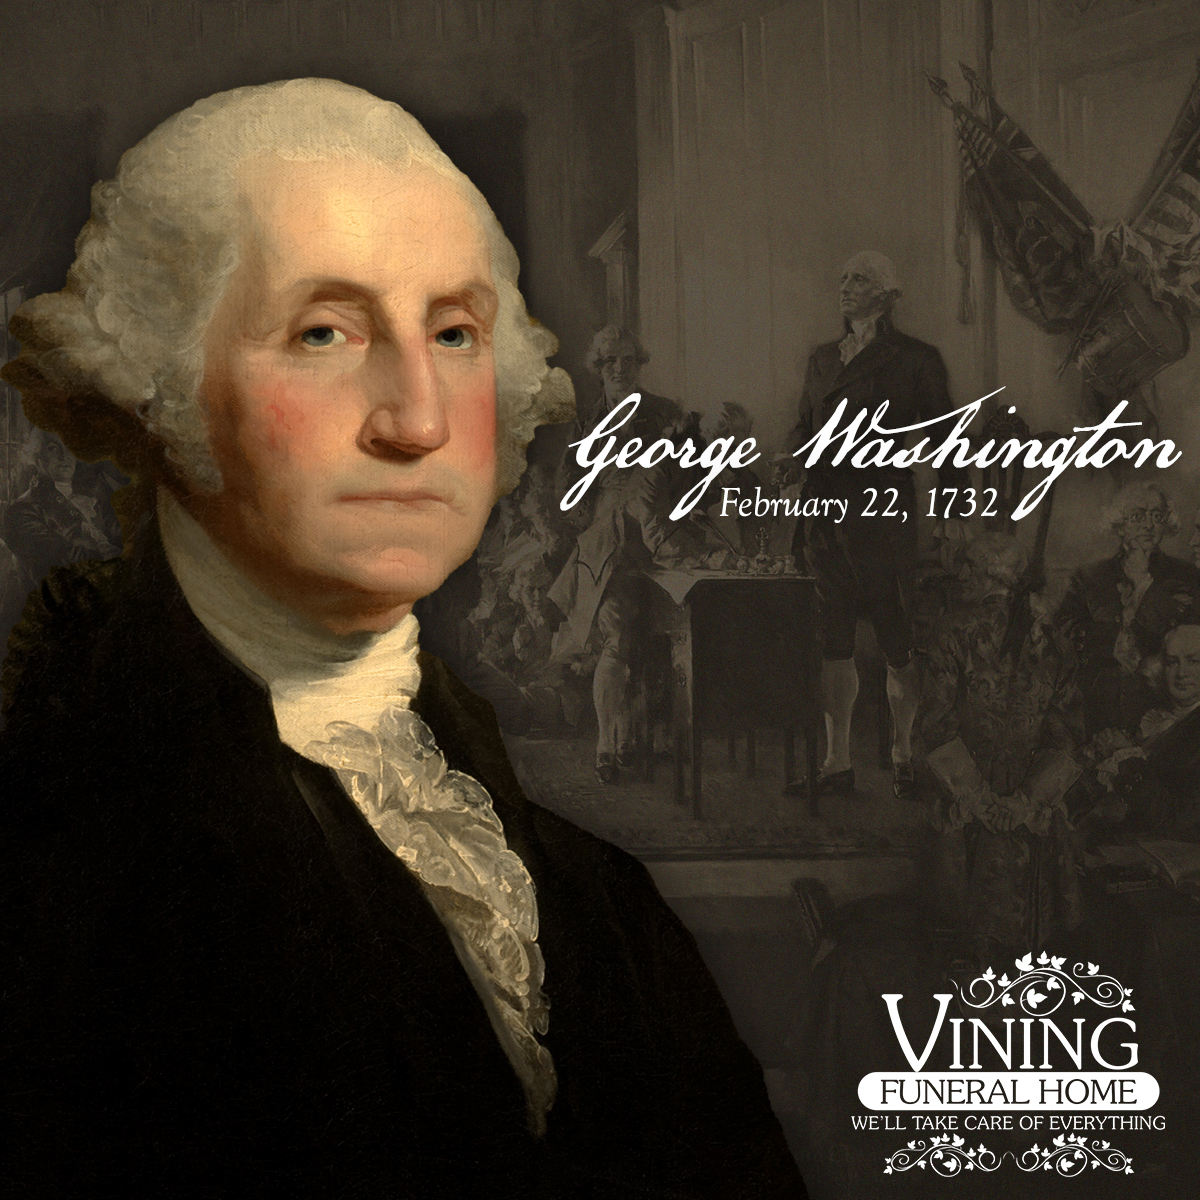 'If freedom of speech is taken away, then dumb and silent we may be led, like sheep to the slaughter.'

Remembering the Founding Father and our First President of the United States on the day of his birth, President George Washington.

#GeorgeWashington 
#FoundingFather